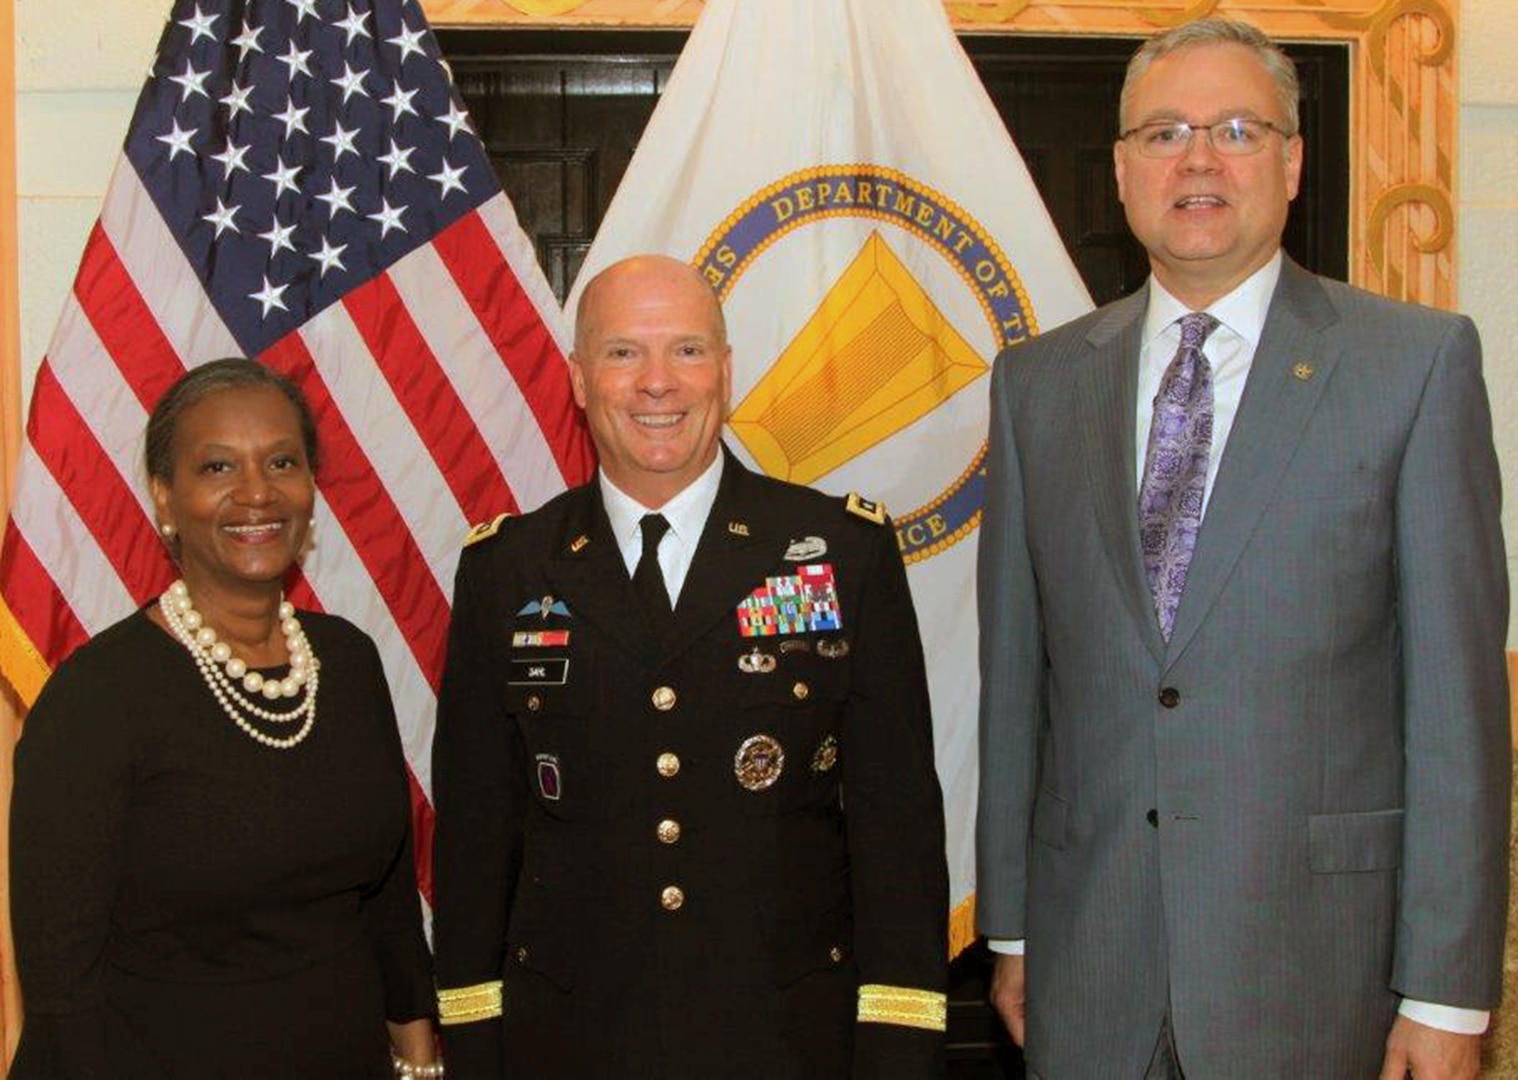 Lt. Gen. Kenneth Dahl (center), commanding general, U.S. Army Installation Management Command, welcomes IMCOM's two new Senior Executive Service leaders within its headquarters staff at Joint Base San Antonio-Fort Sam Houston. At left is Delia Adams, who, as IMCOM’s senior contracting executive, is responsible for an annual $4.5 billion portfolio of appropriated and non-appropriated contracts and procurements. At right is J. Randall Robinson, who will serve as the executive deputy to the commanding general.